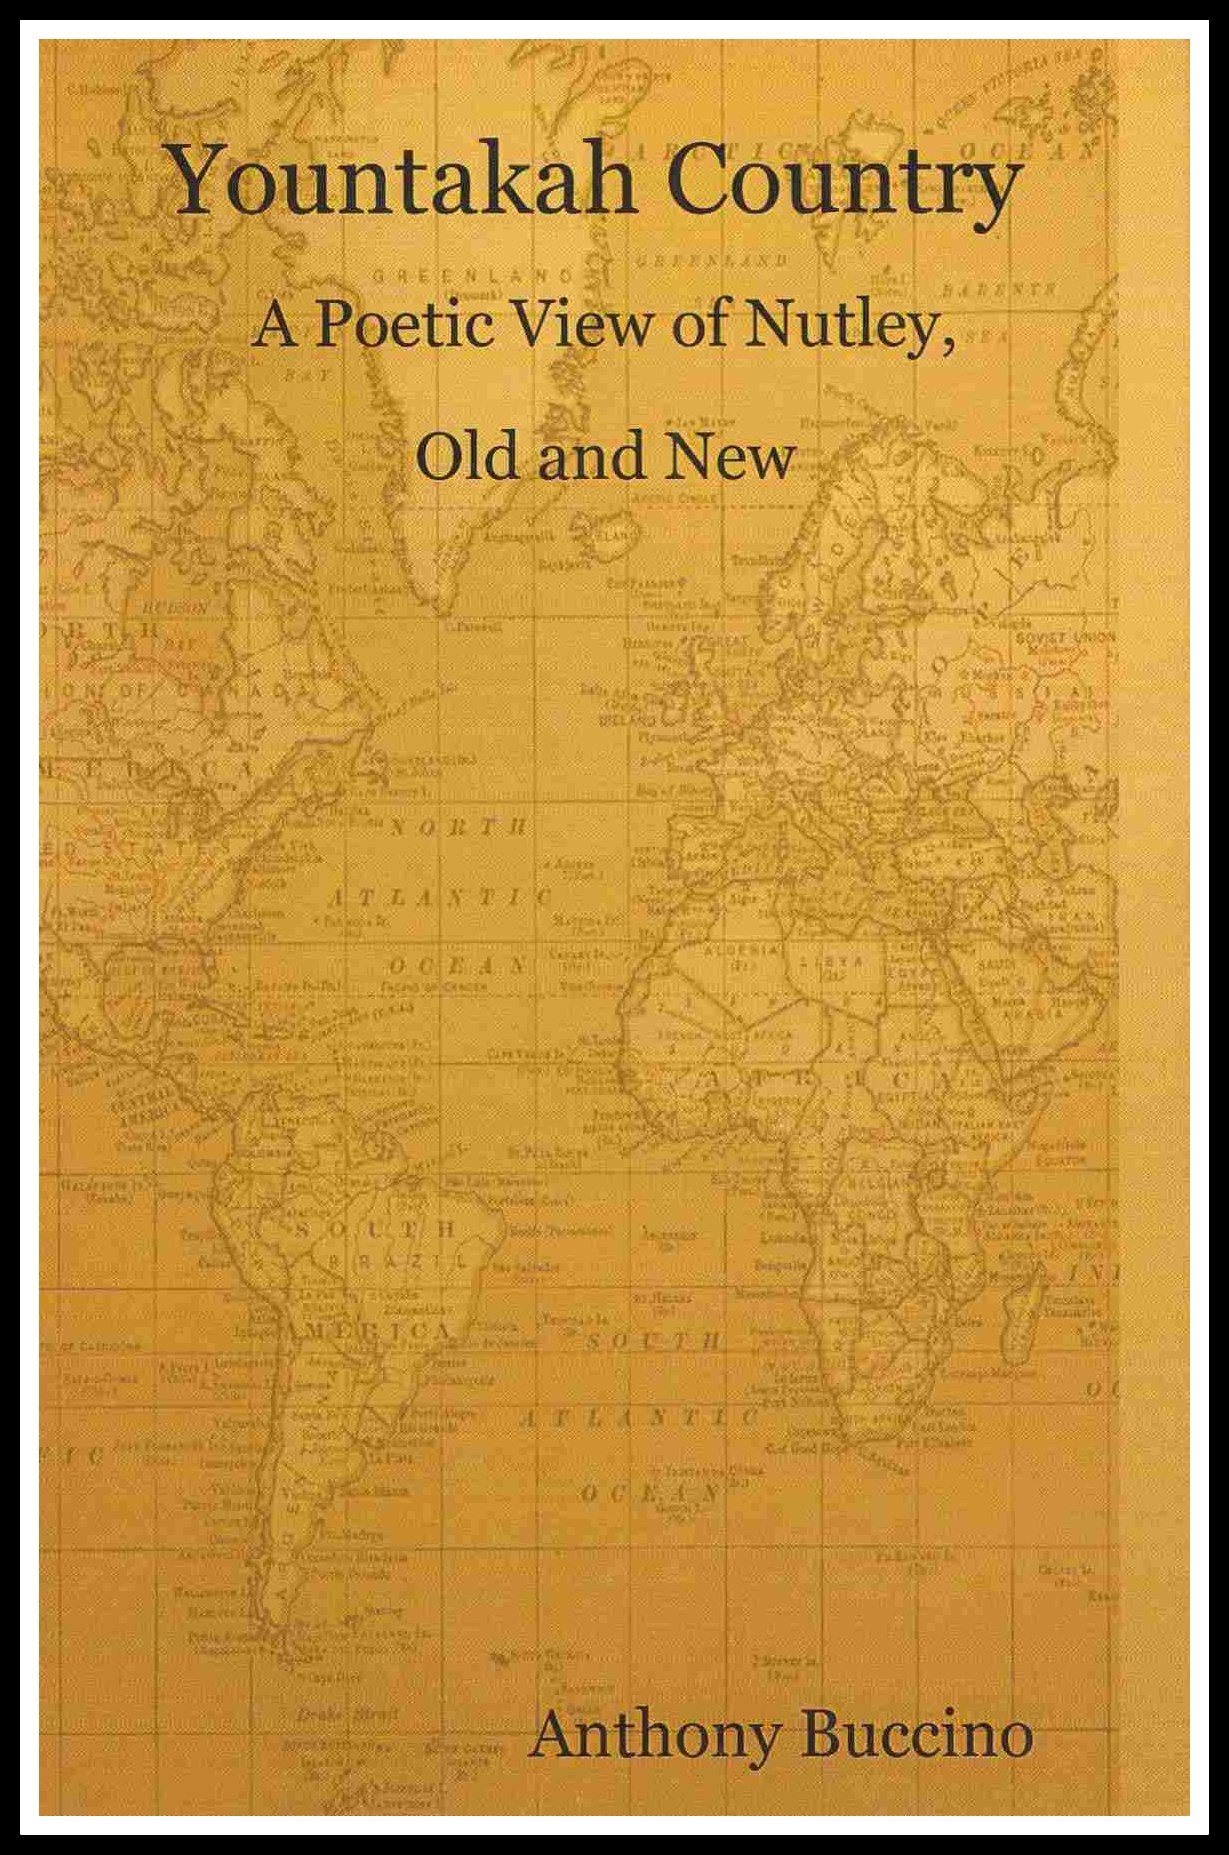 Yountakah Country - A Poetic View of Nutley Old and New by Anthony Buccino